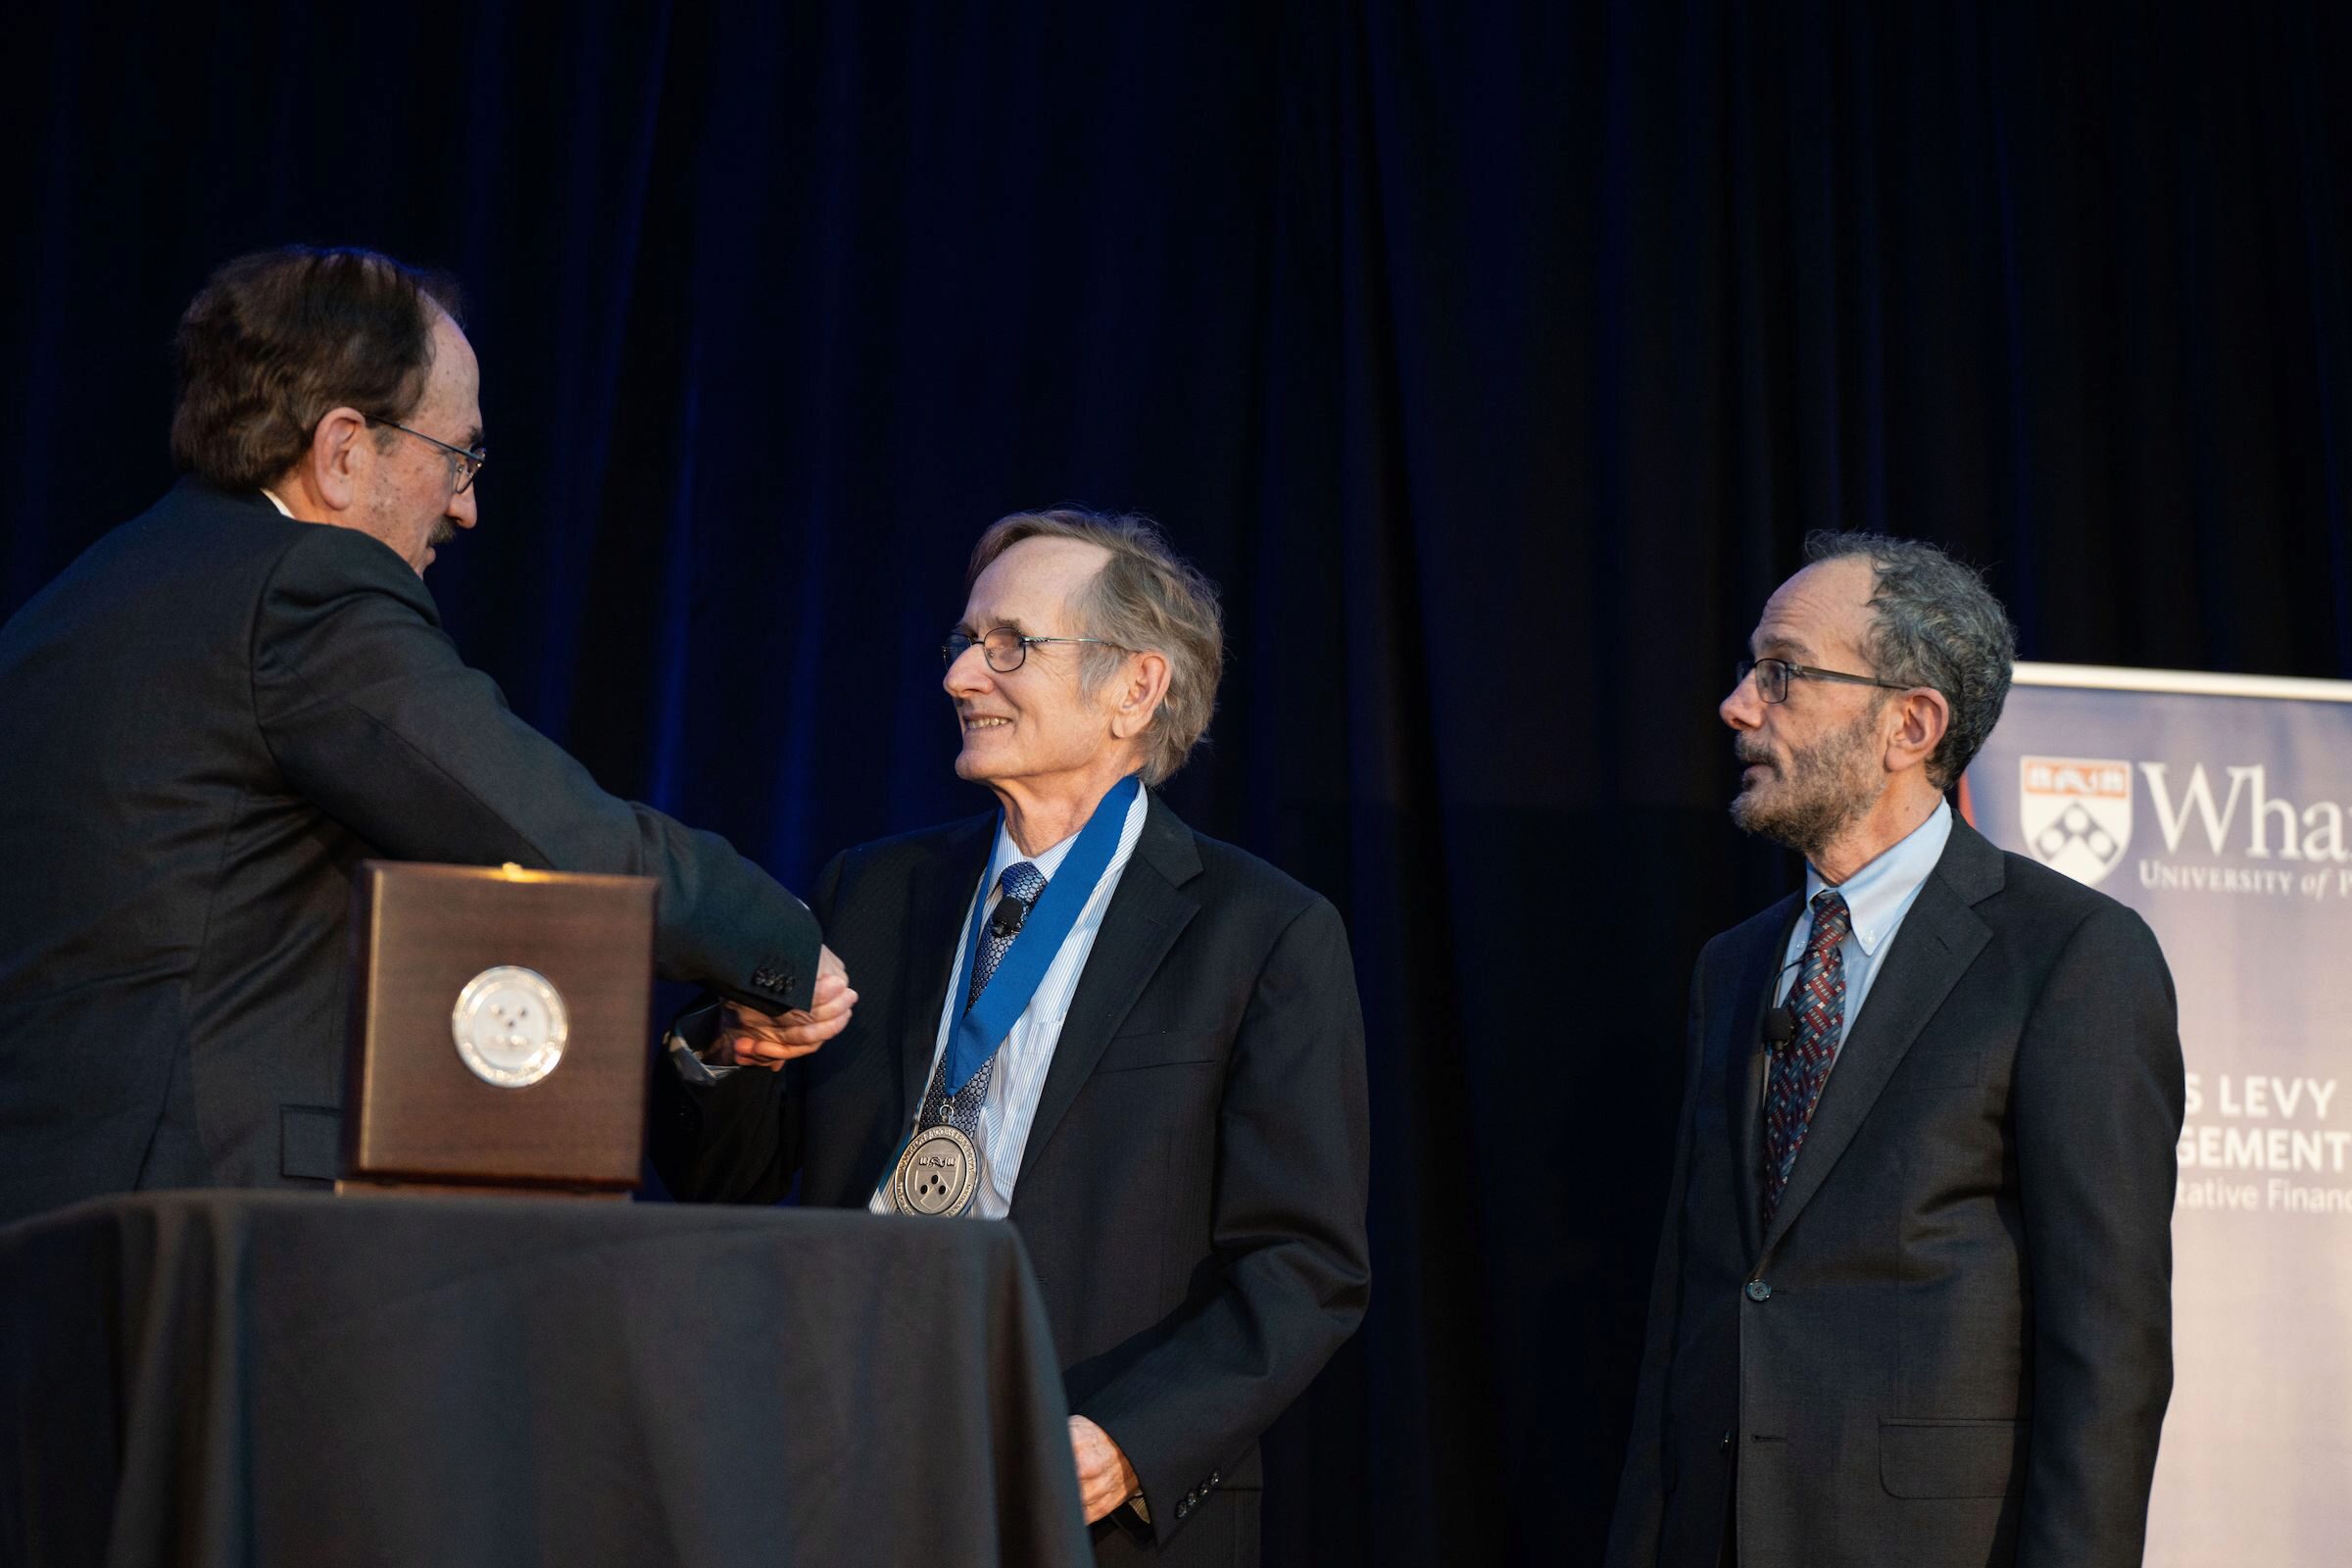 Bruce Jacobs and Albert S. “Pete” Kyle shake hands. Pete wears a medal. Ken Levy stands by.